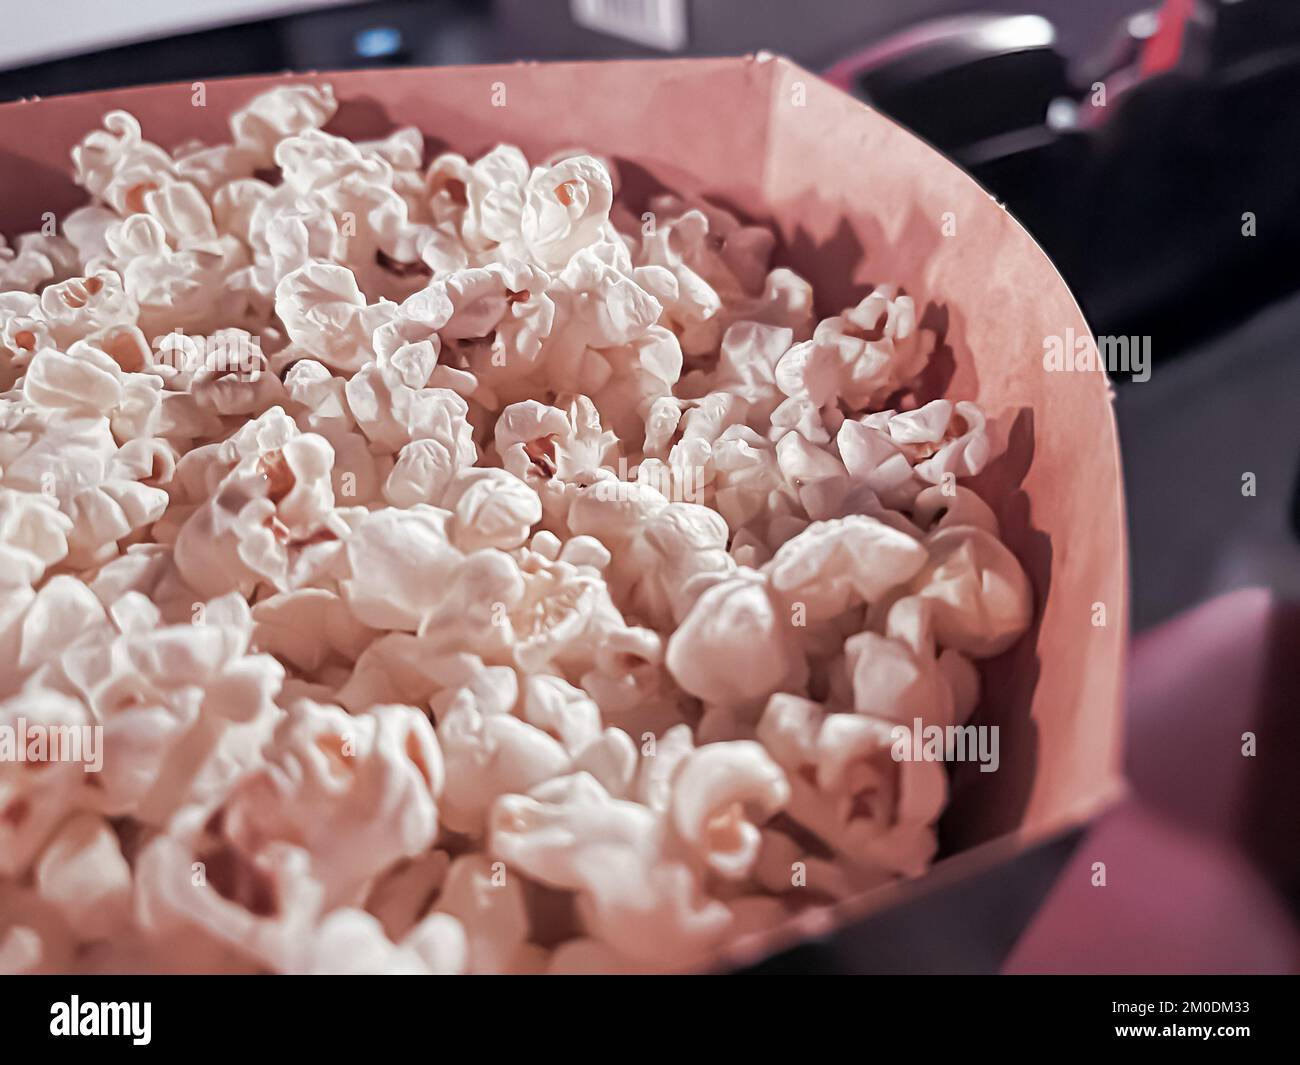 Cinema and entertainment, popcorn box in the movie theatre for tv show streaming service and film industry production branding Stock Photo